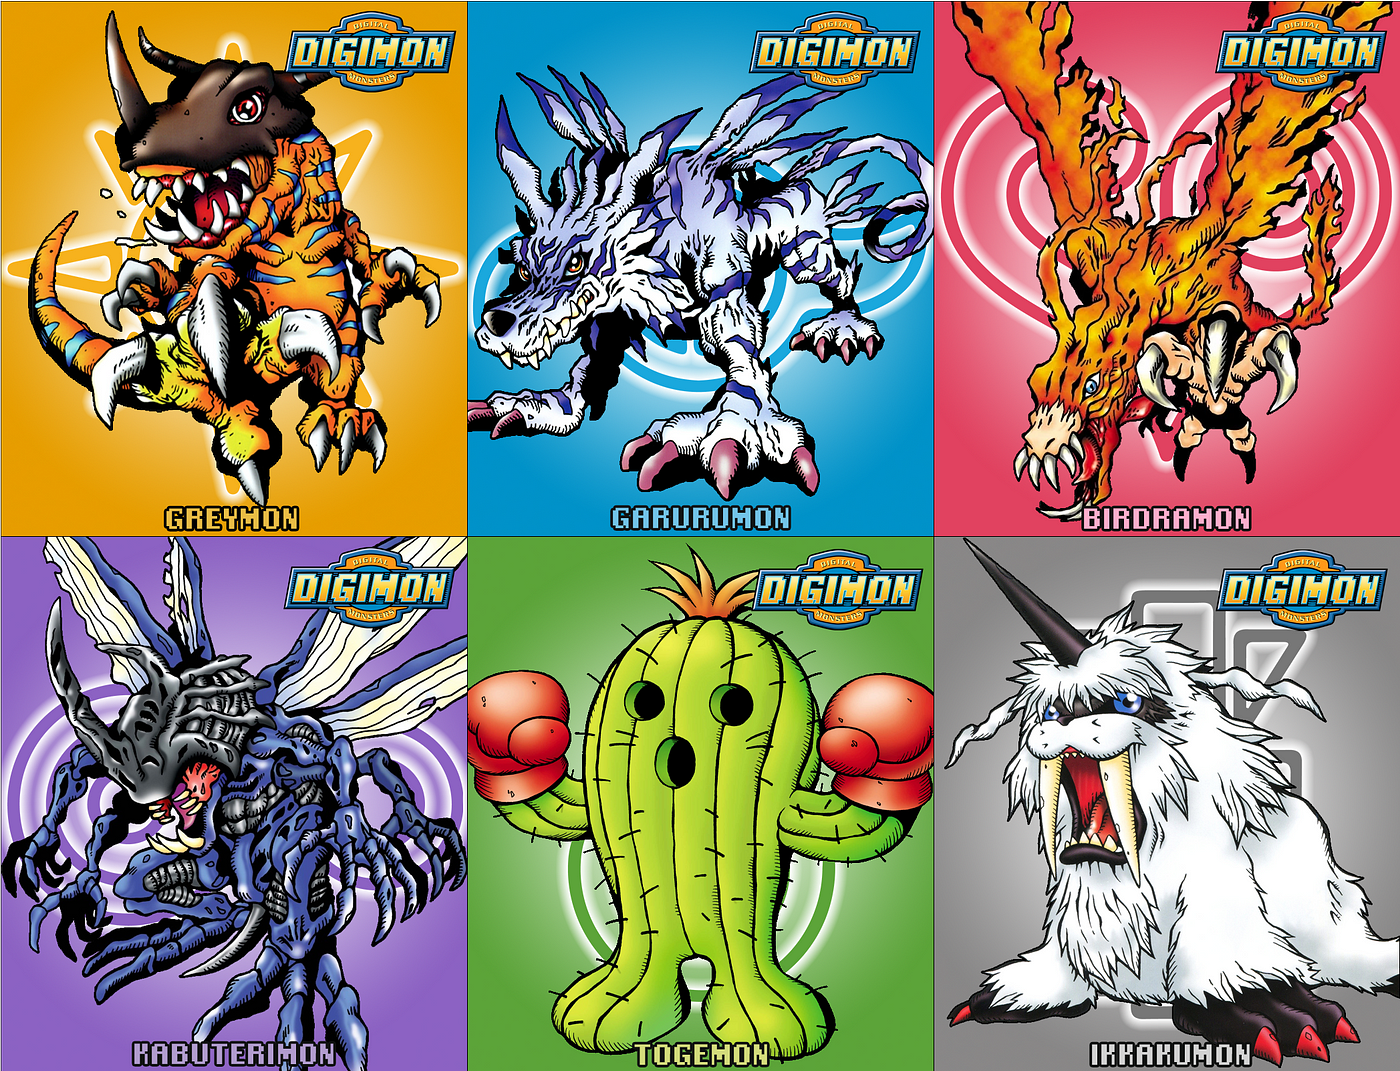 Digimons are trap, Digimon